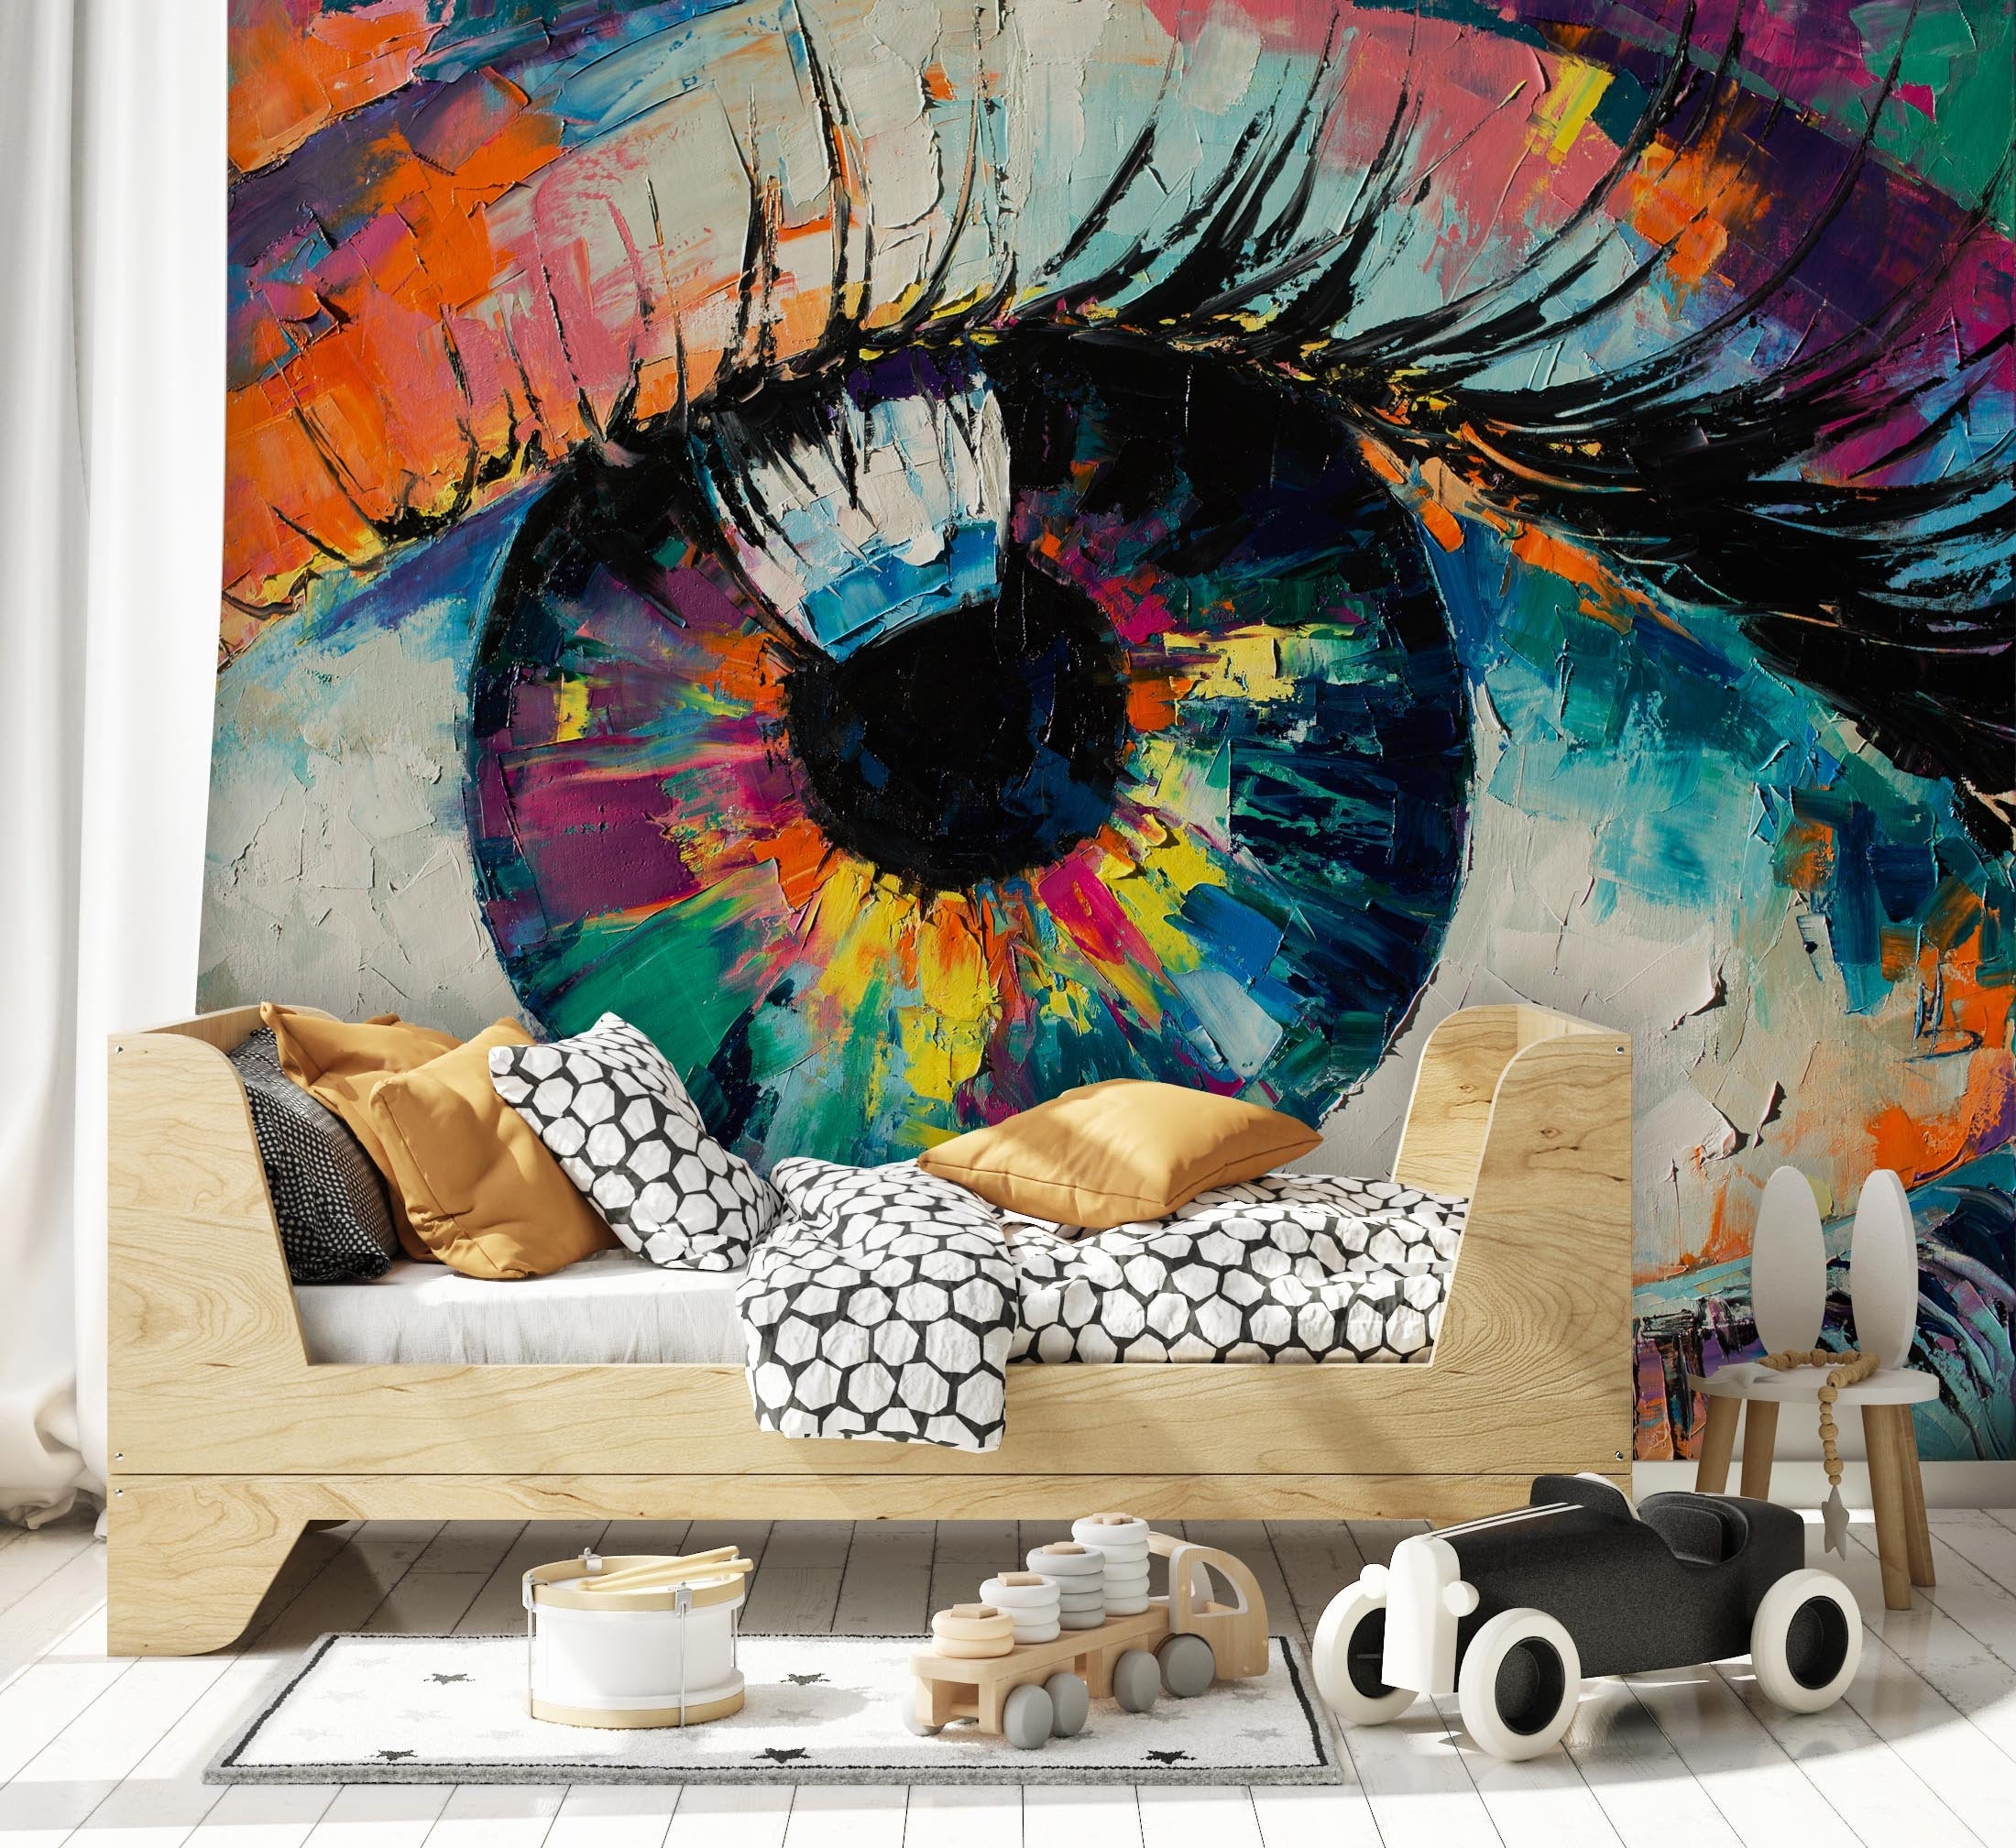 Conceptual Abstract Picture of the Eye Oil Painting in Colorful Colors Wallpaper Self Adhesive Peel and Stick Wall Sticker Wall Decoration